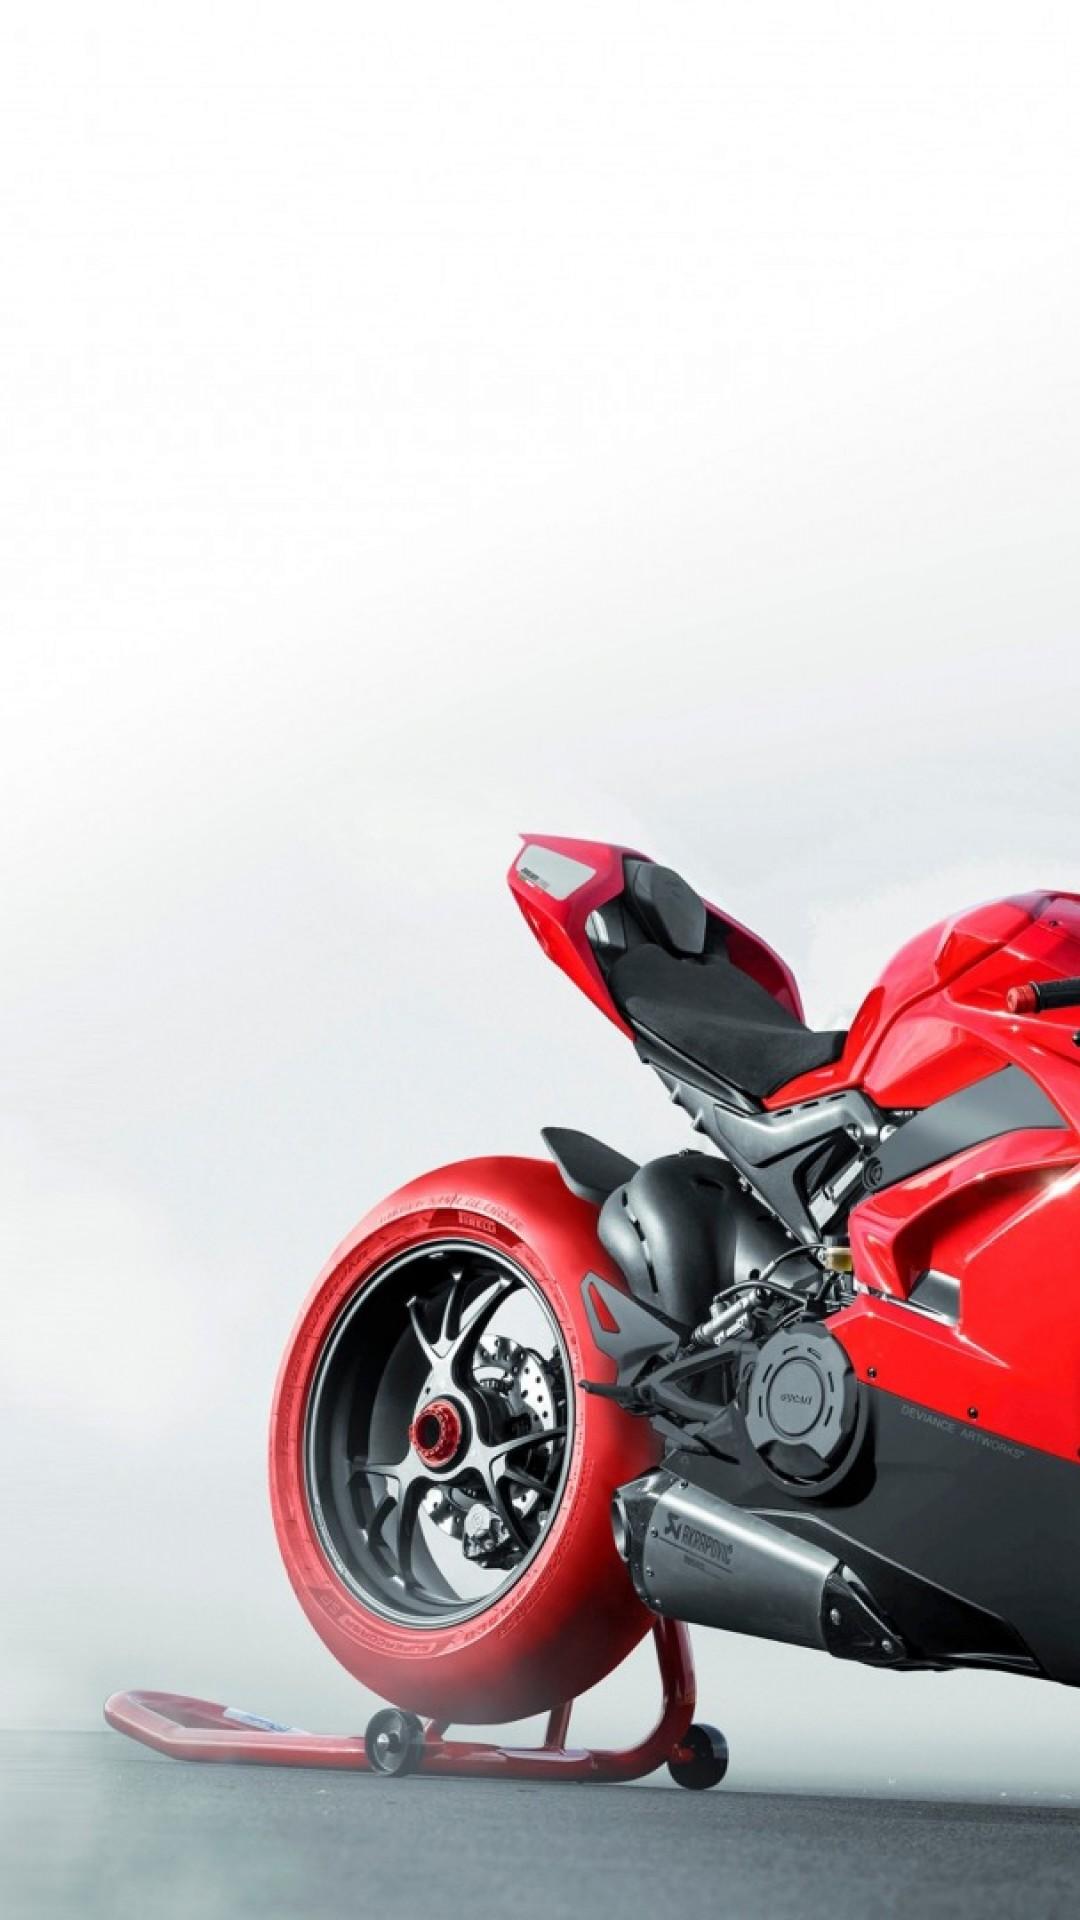 Ducati Photos Download The BEST Free Ducati Stock Photos  HD Images